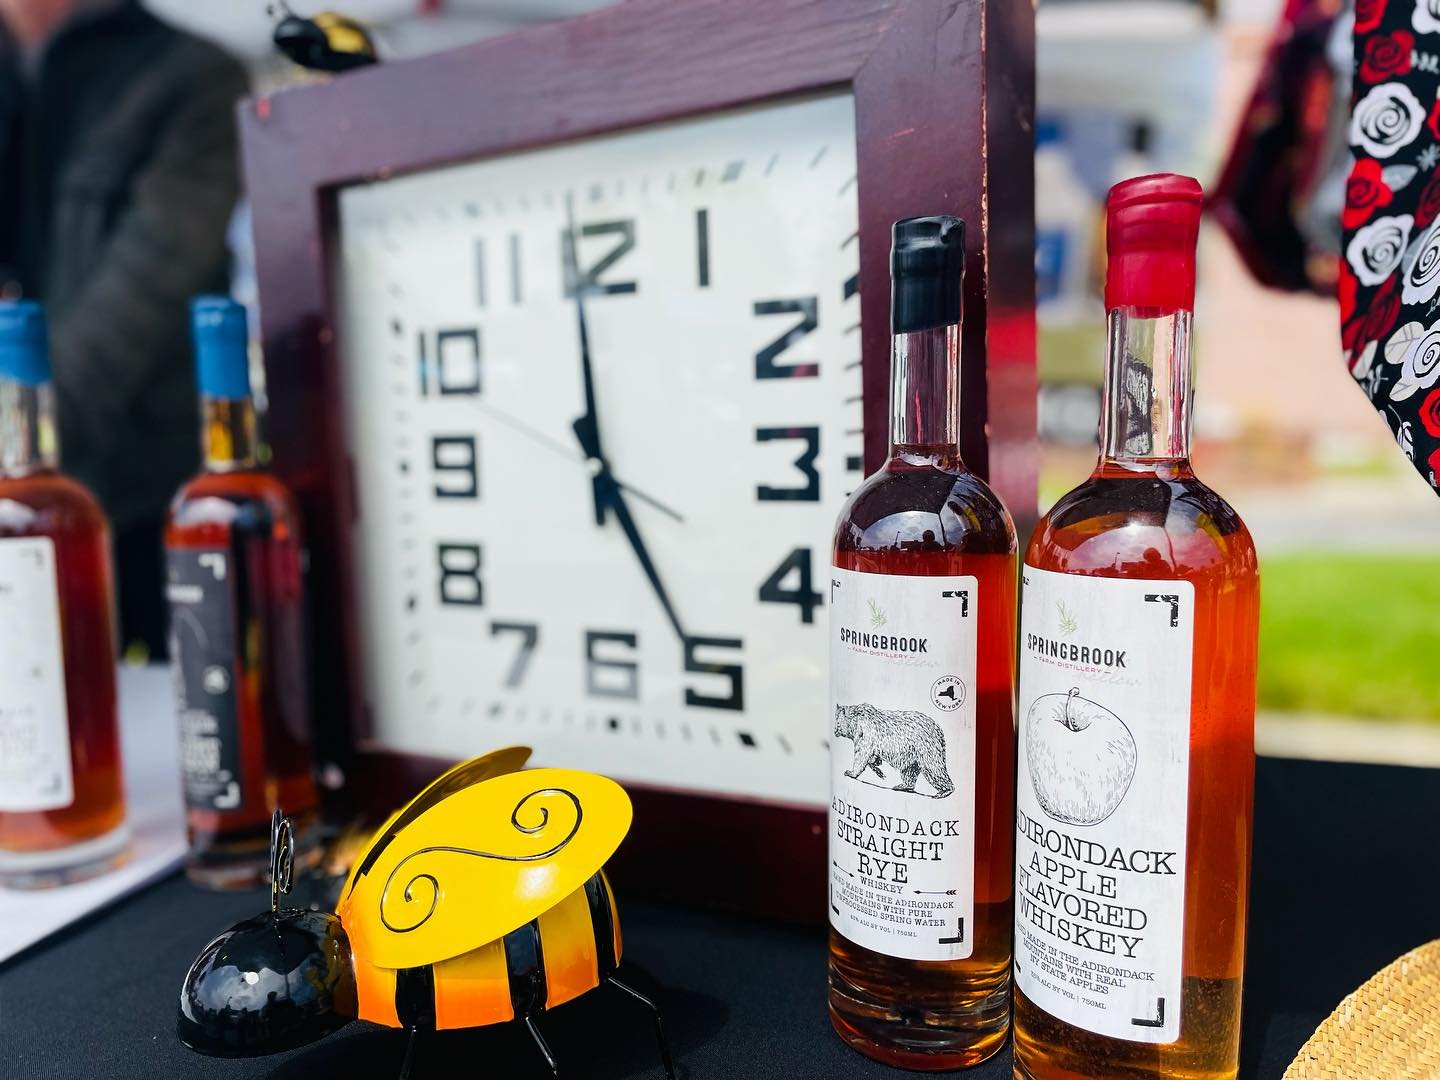 It&rsquo;s 5 o&rsquo;clock somewhere and we&rsquo;ve poured our last sip. See you next Sunday, Beacon. 

Every Sunday. 10-2. @beaconfarmersmarket Voted BEST FARMERS&rsquo; MARKET by @hudsonvalleymag

#BeaconFarmersMarket #CommunityStrong #farmersmark